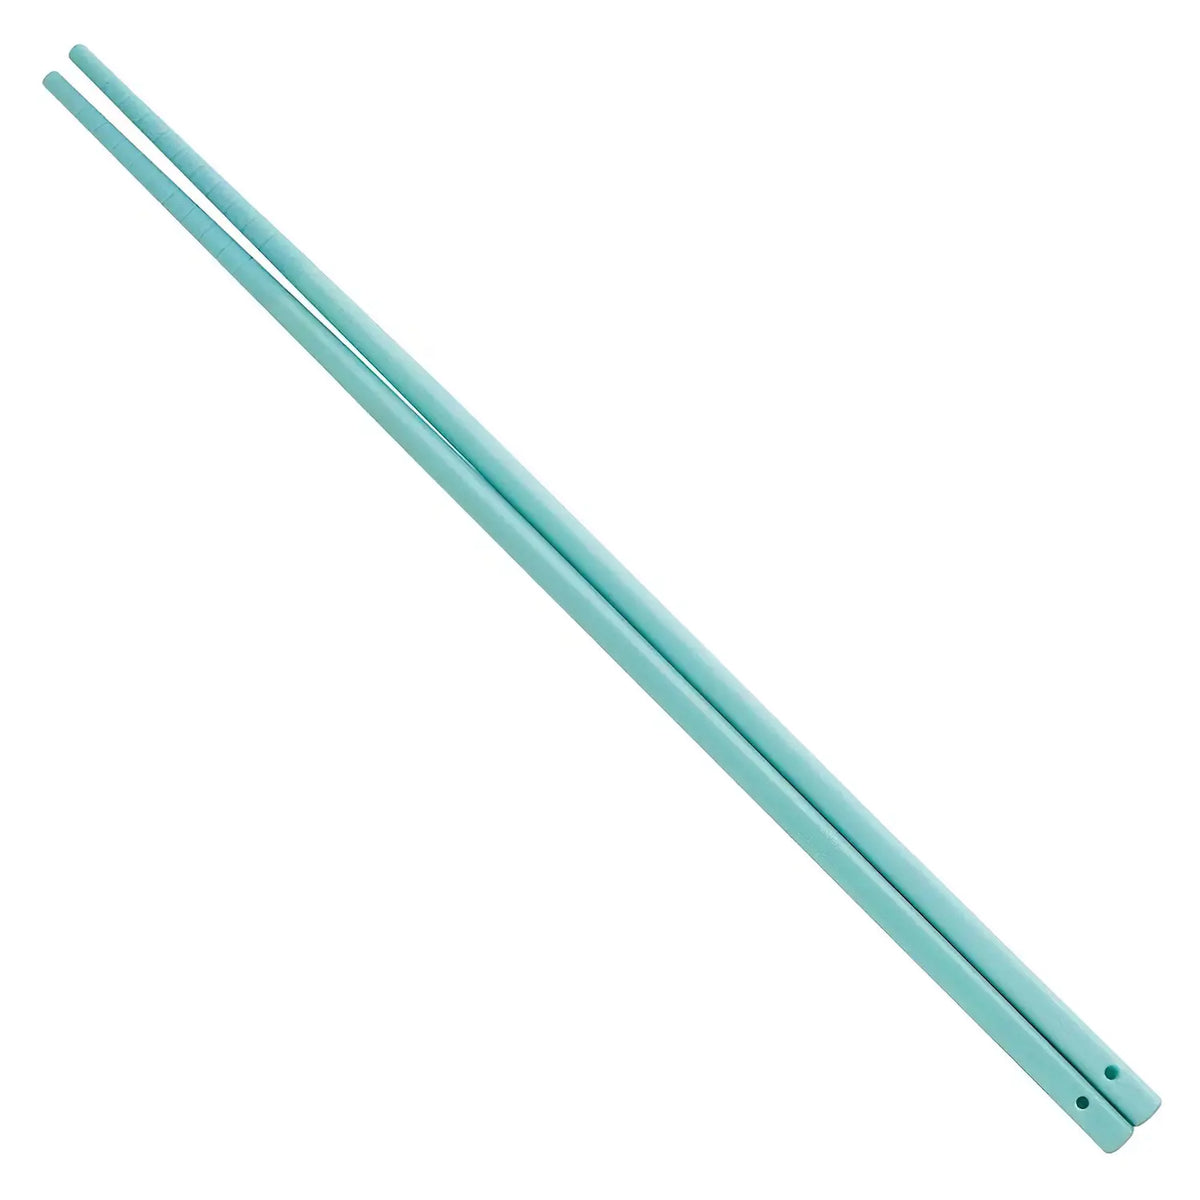 Yaxell Silicone Cooking Chopsticks